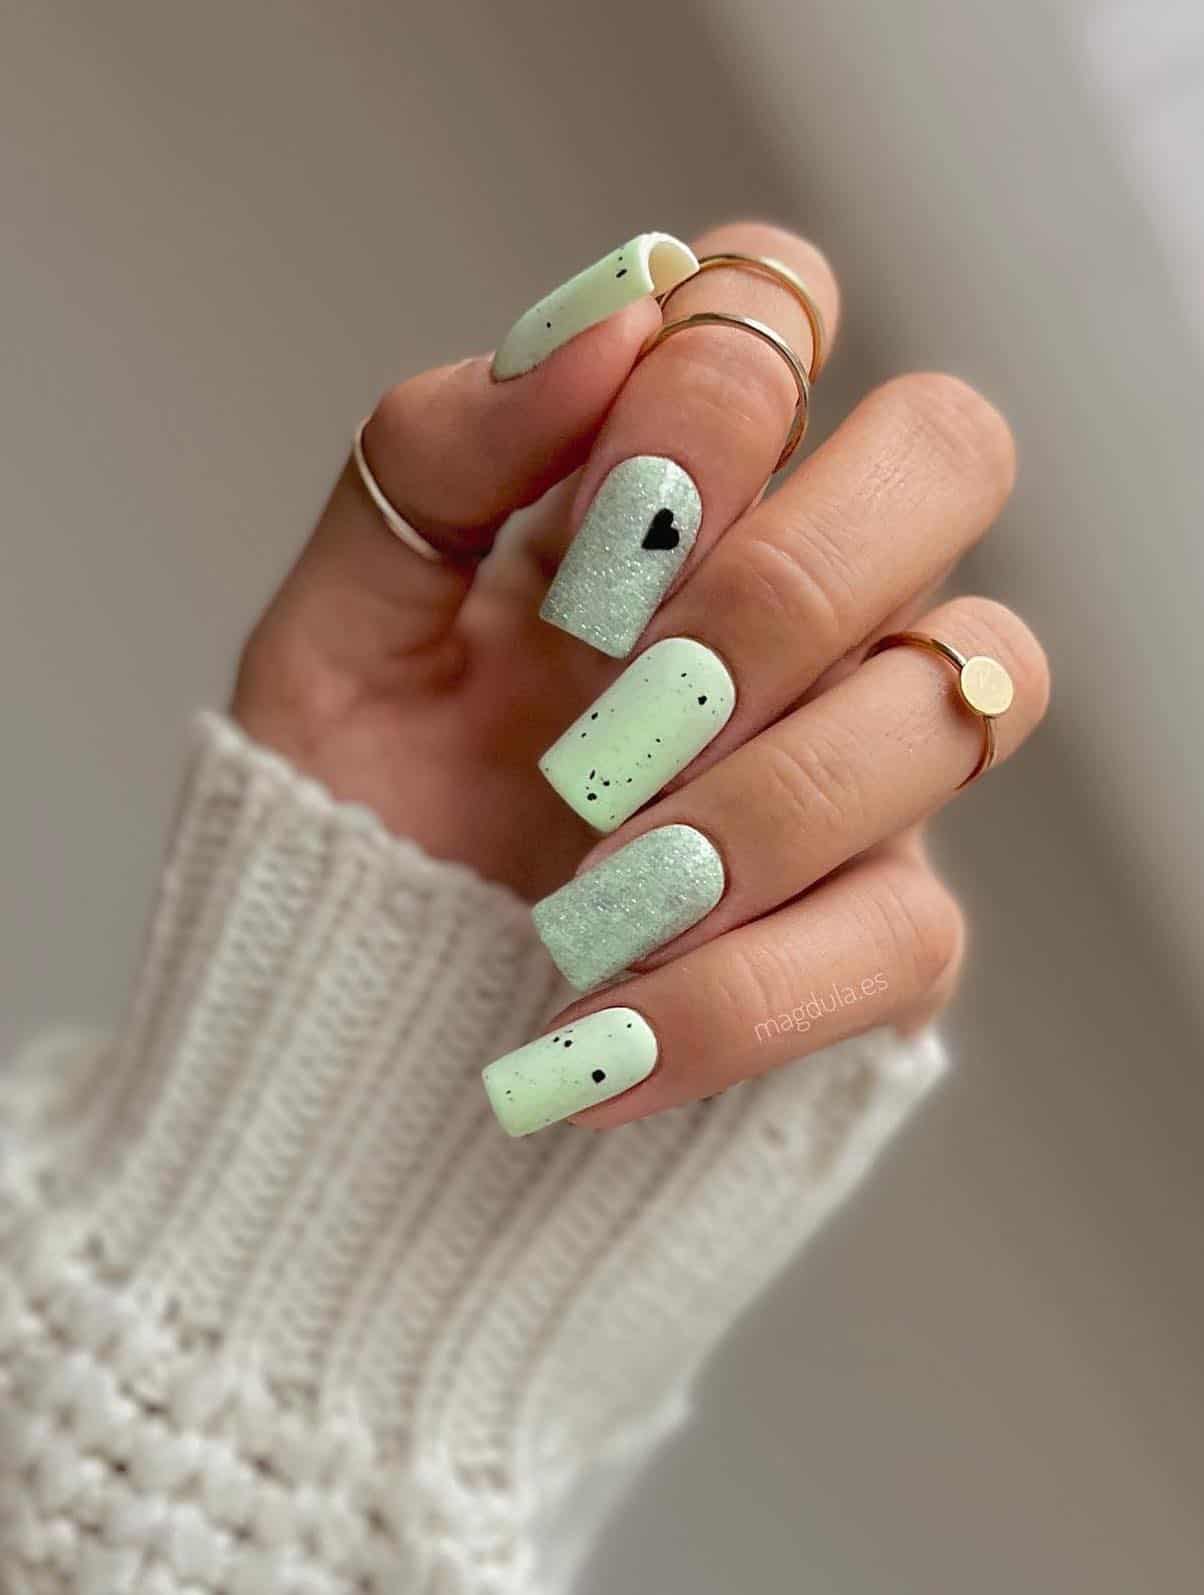 A hand with long square nails painted a mint green and speckled with black s=polish and two accent nails with a glitter topcoat and black heart detail